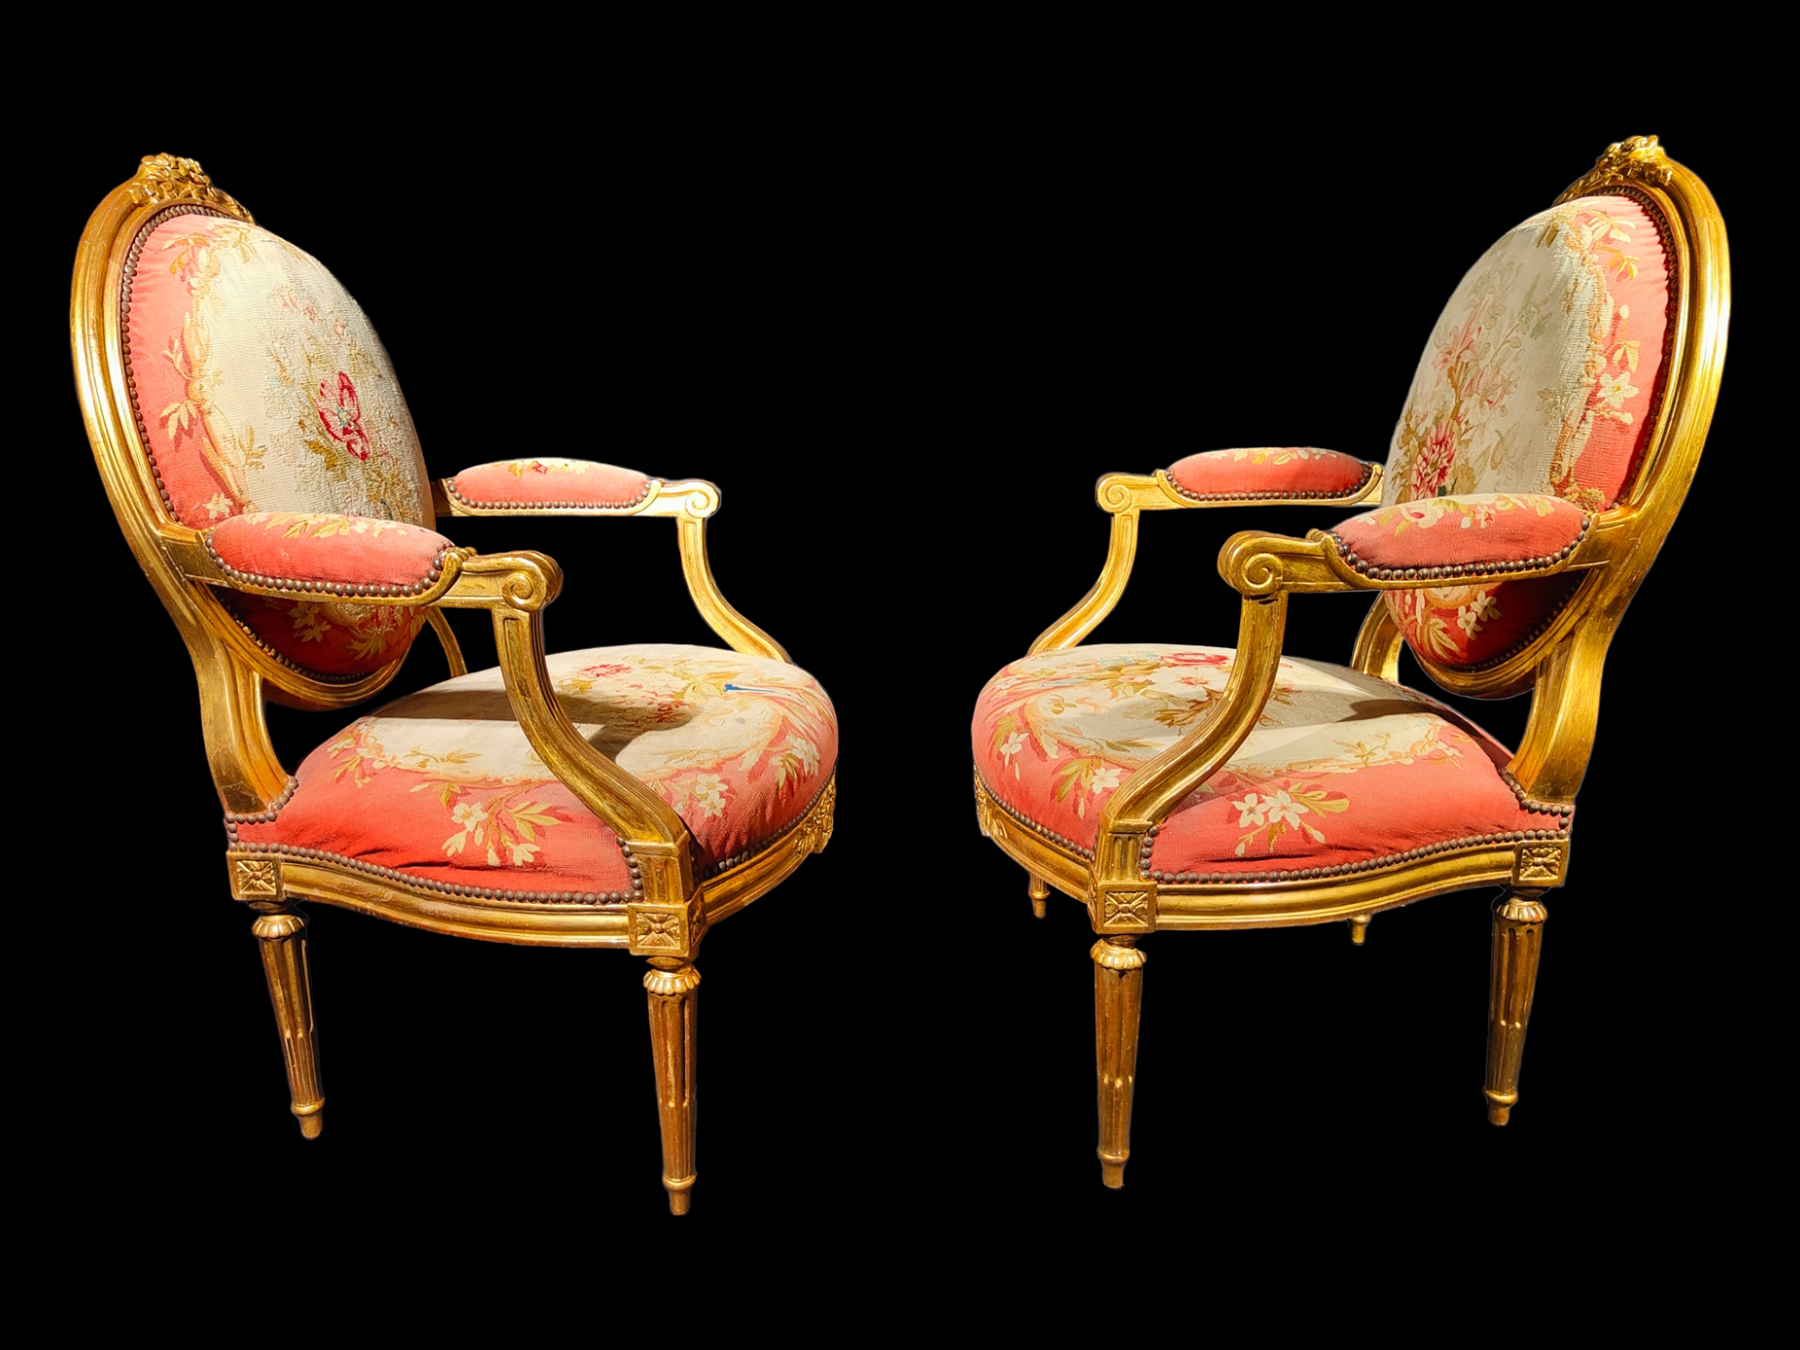 Important 18th century French chairs signed Claude Chevigny, circa 1775-80 - Image 5 of 7